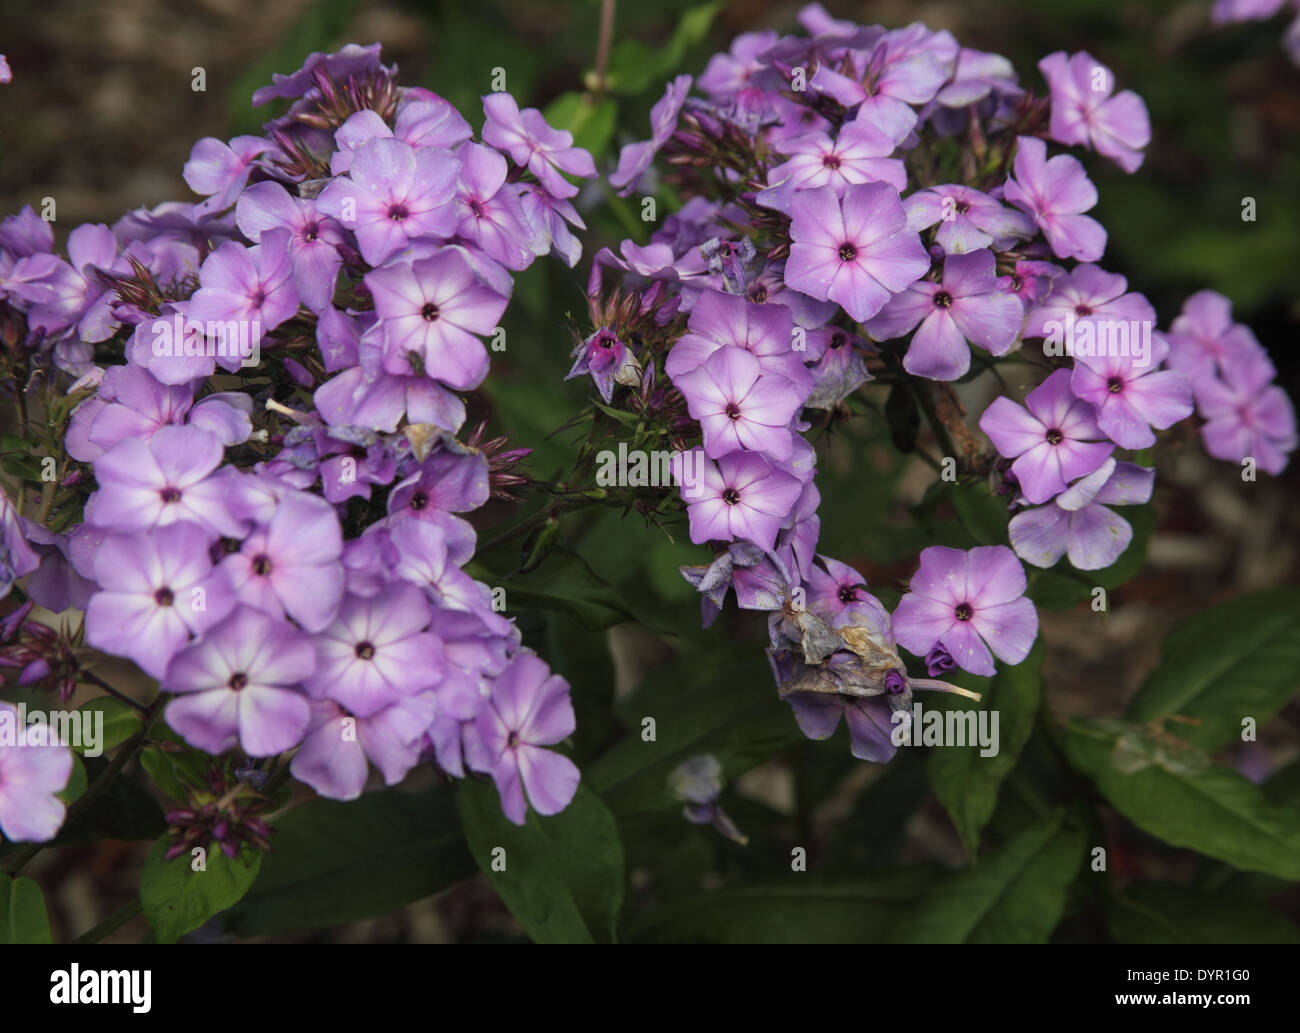 Phlox paniculata 'Violet' flame series close up of flowers Stock Photo